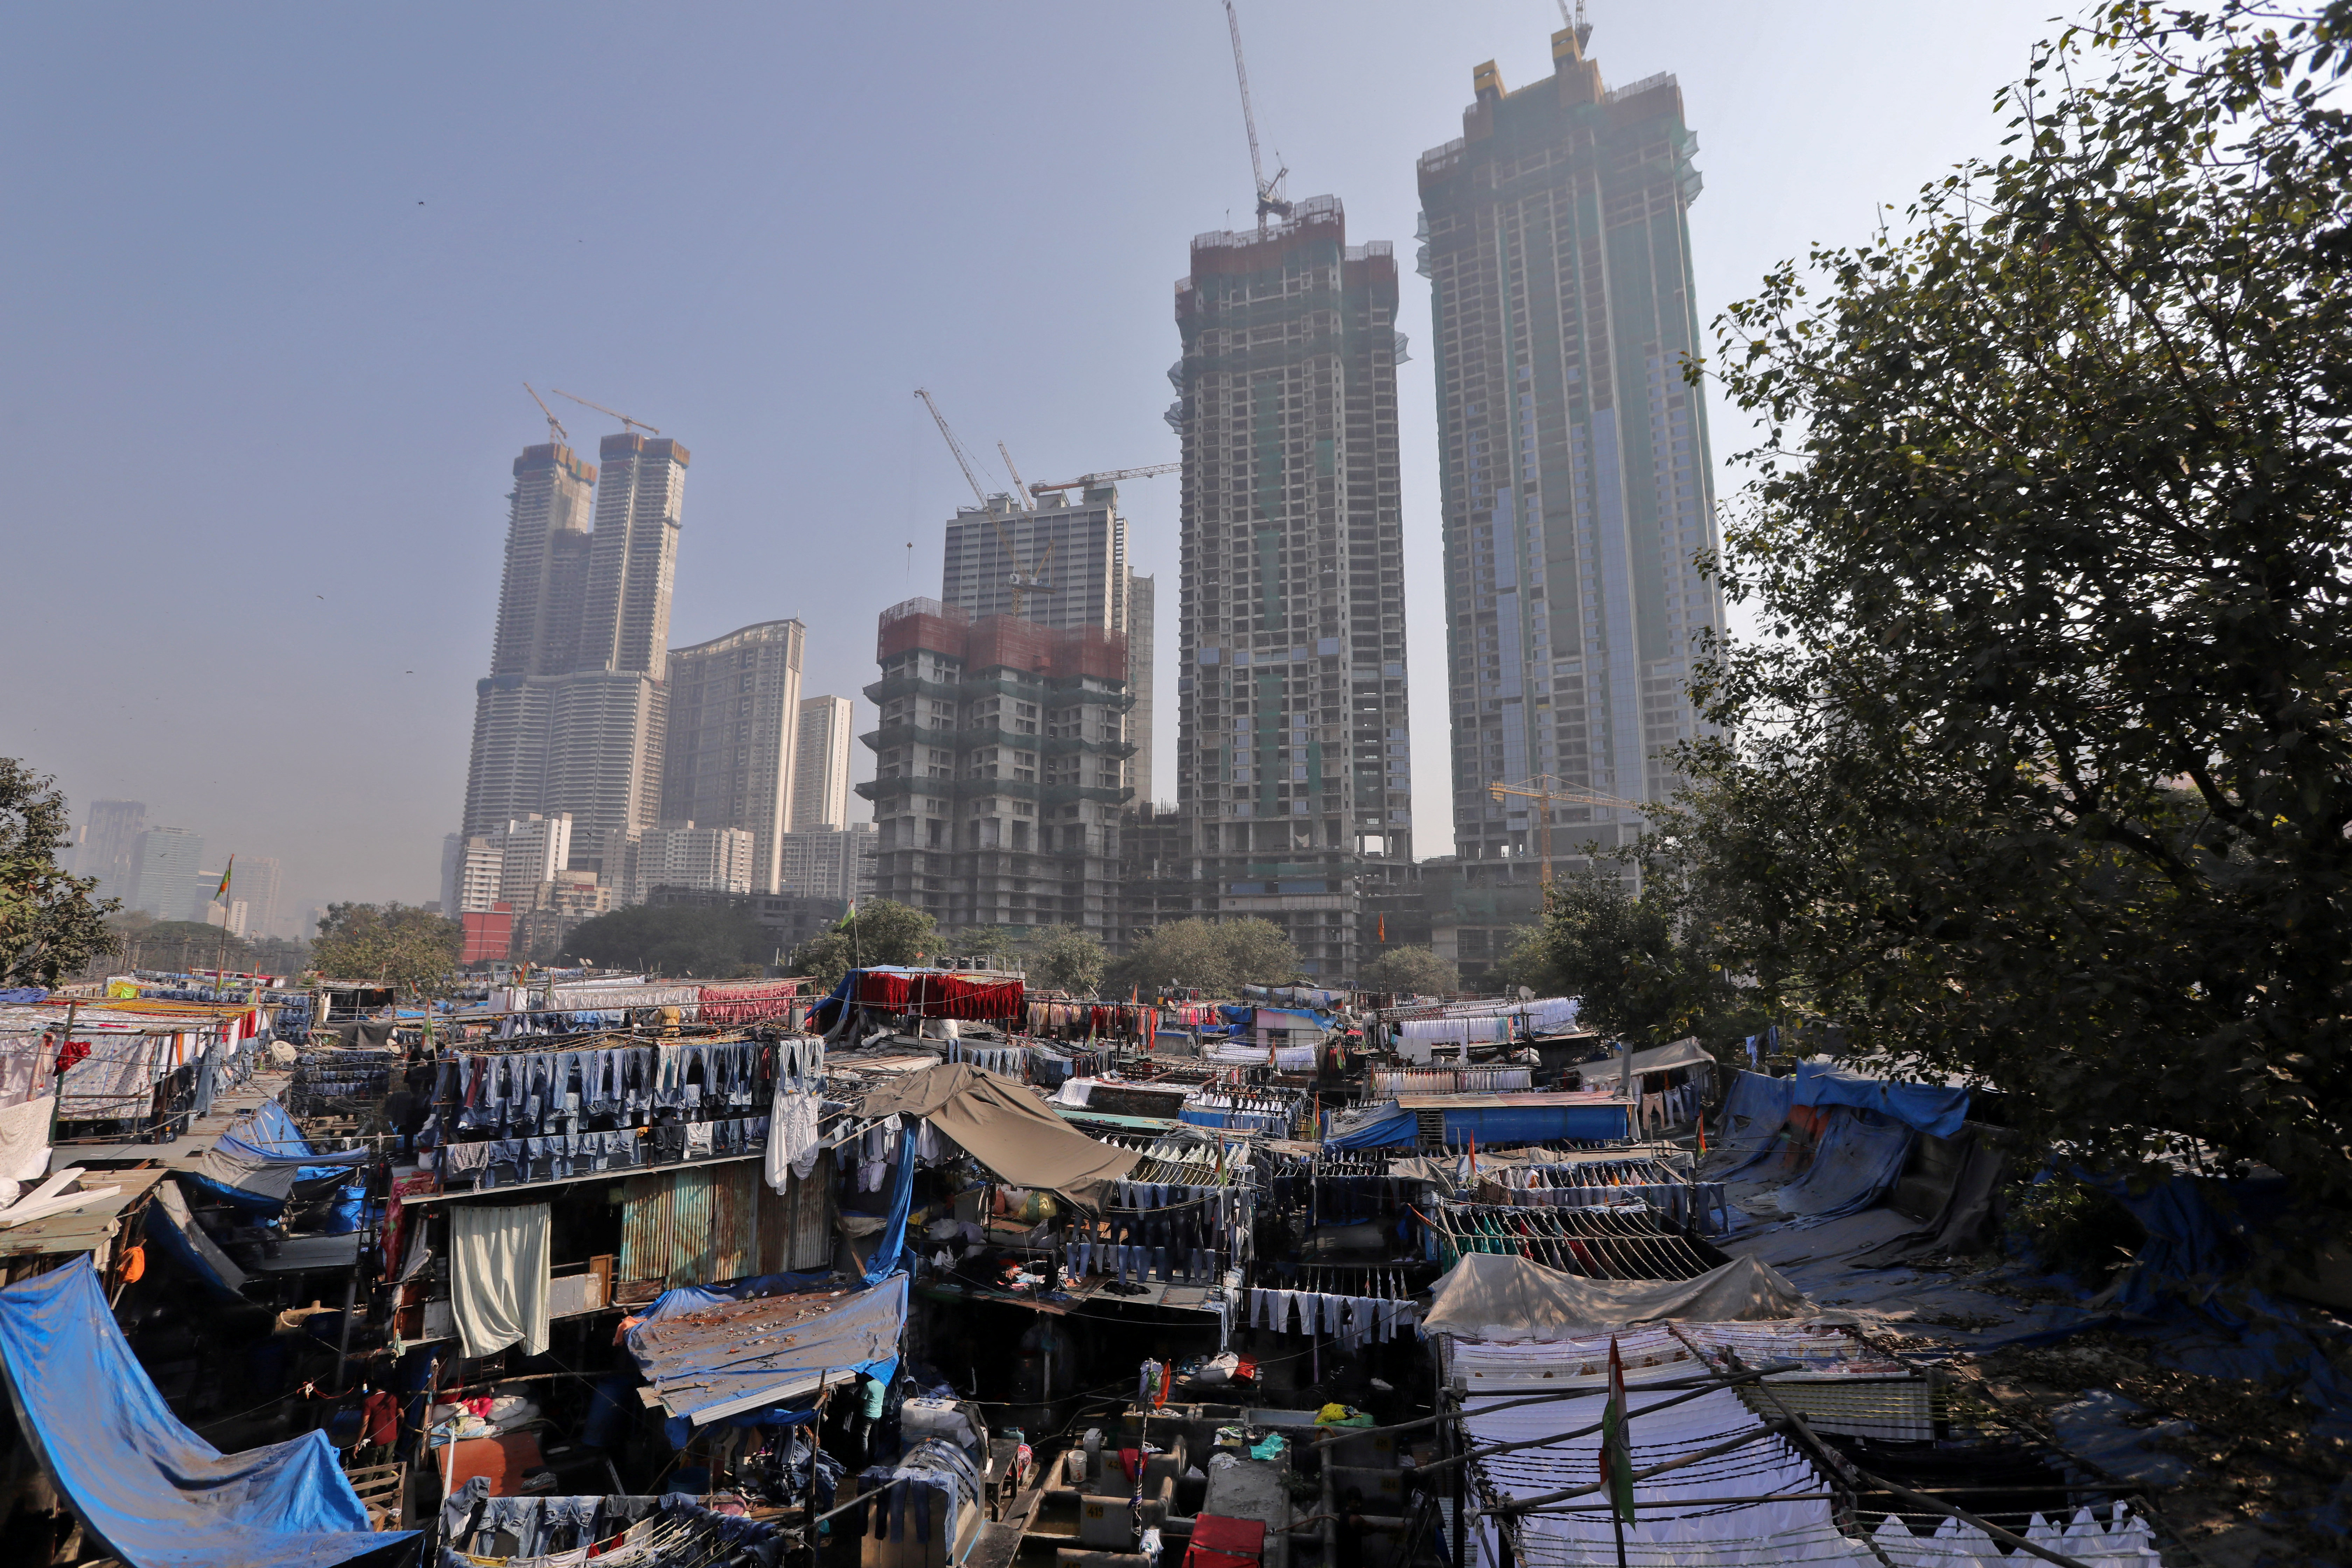 A view shows Dhobi Ghat open air laundry in Mumbai